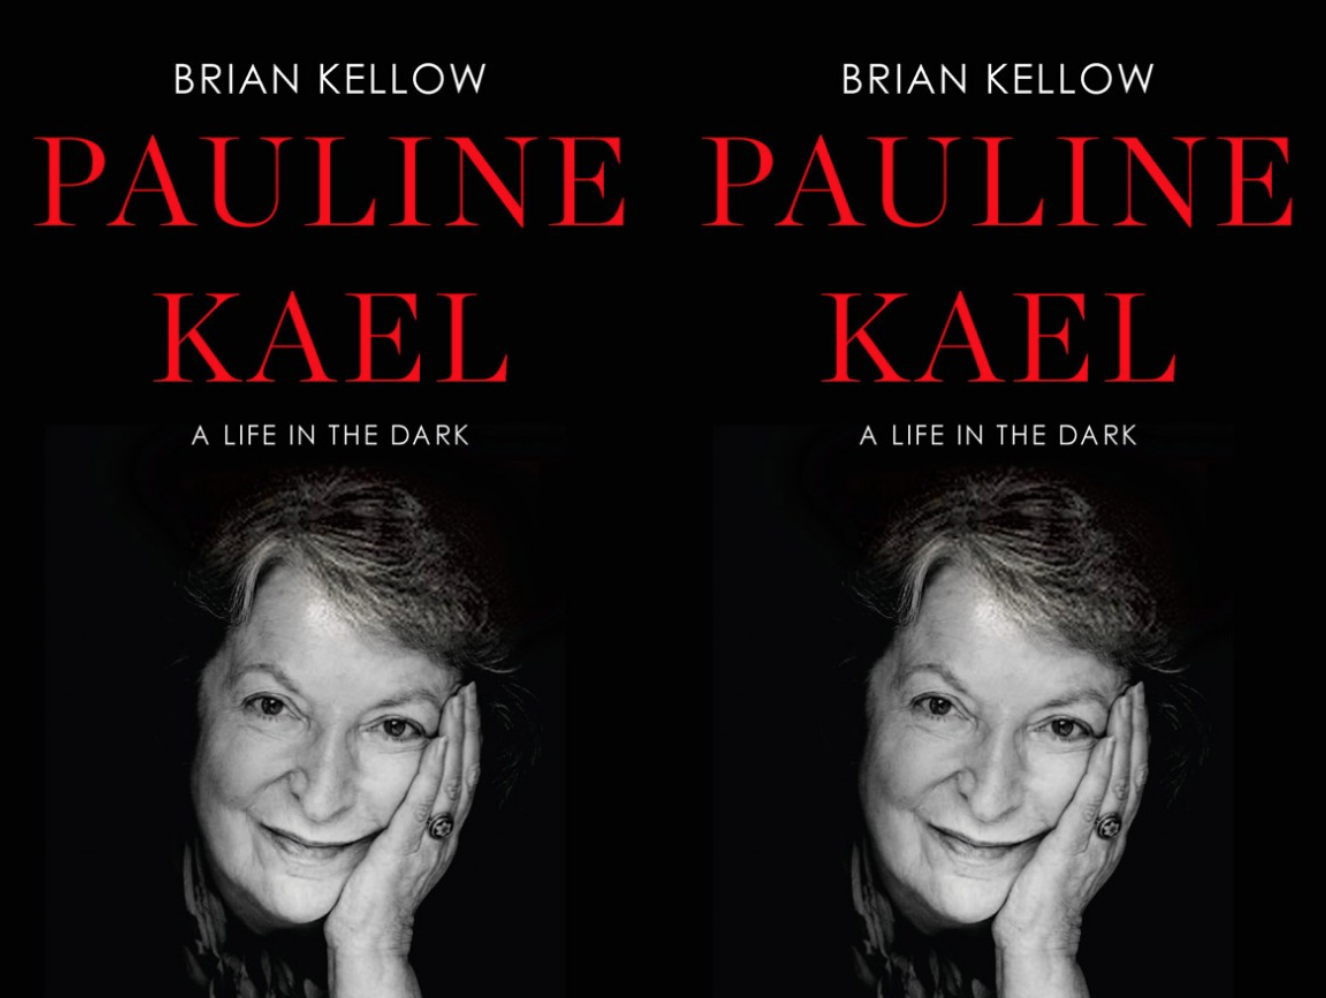 Cover art for A Life in the Dark by Pauline Kael